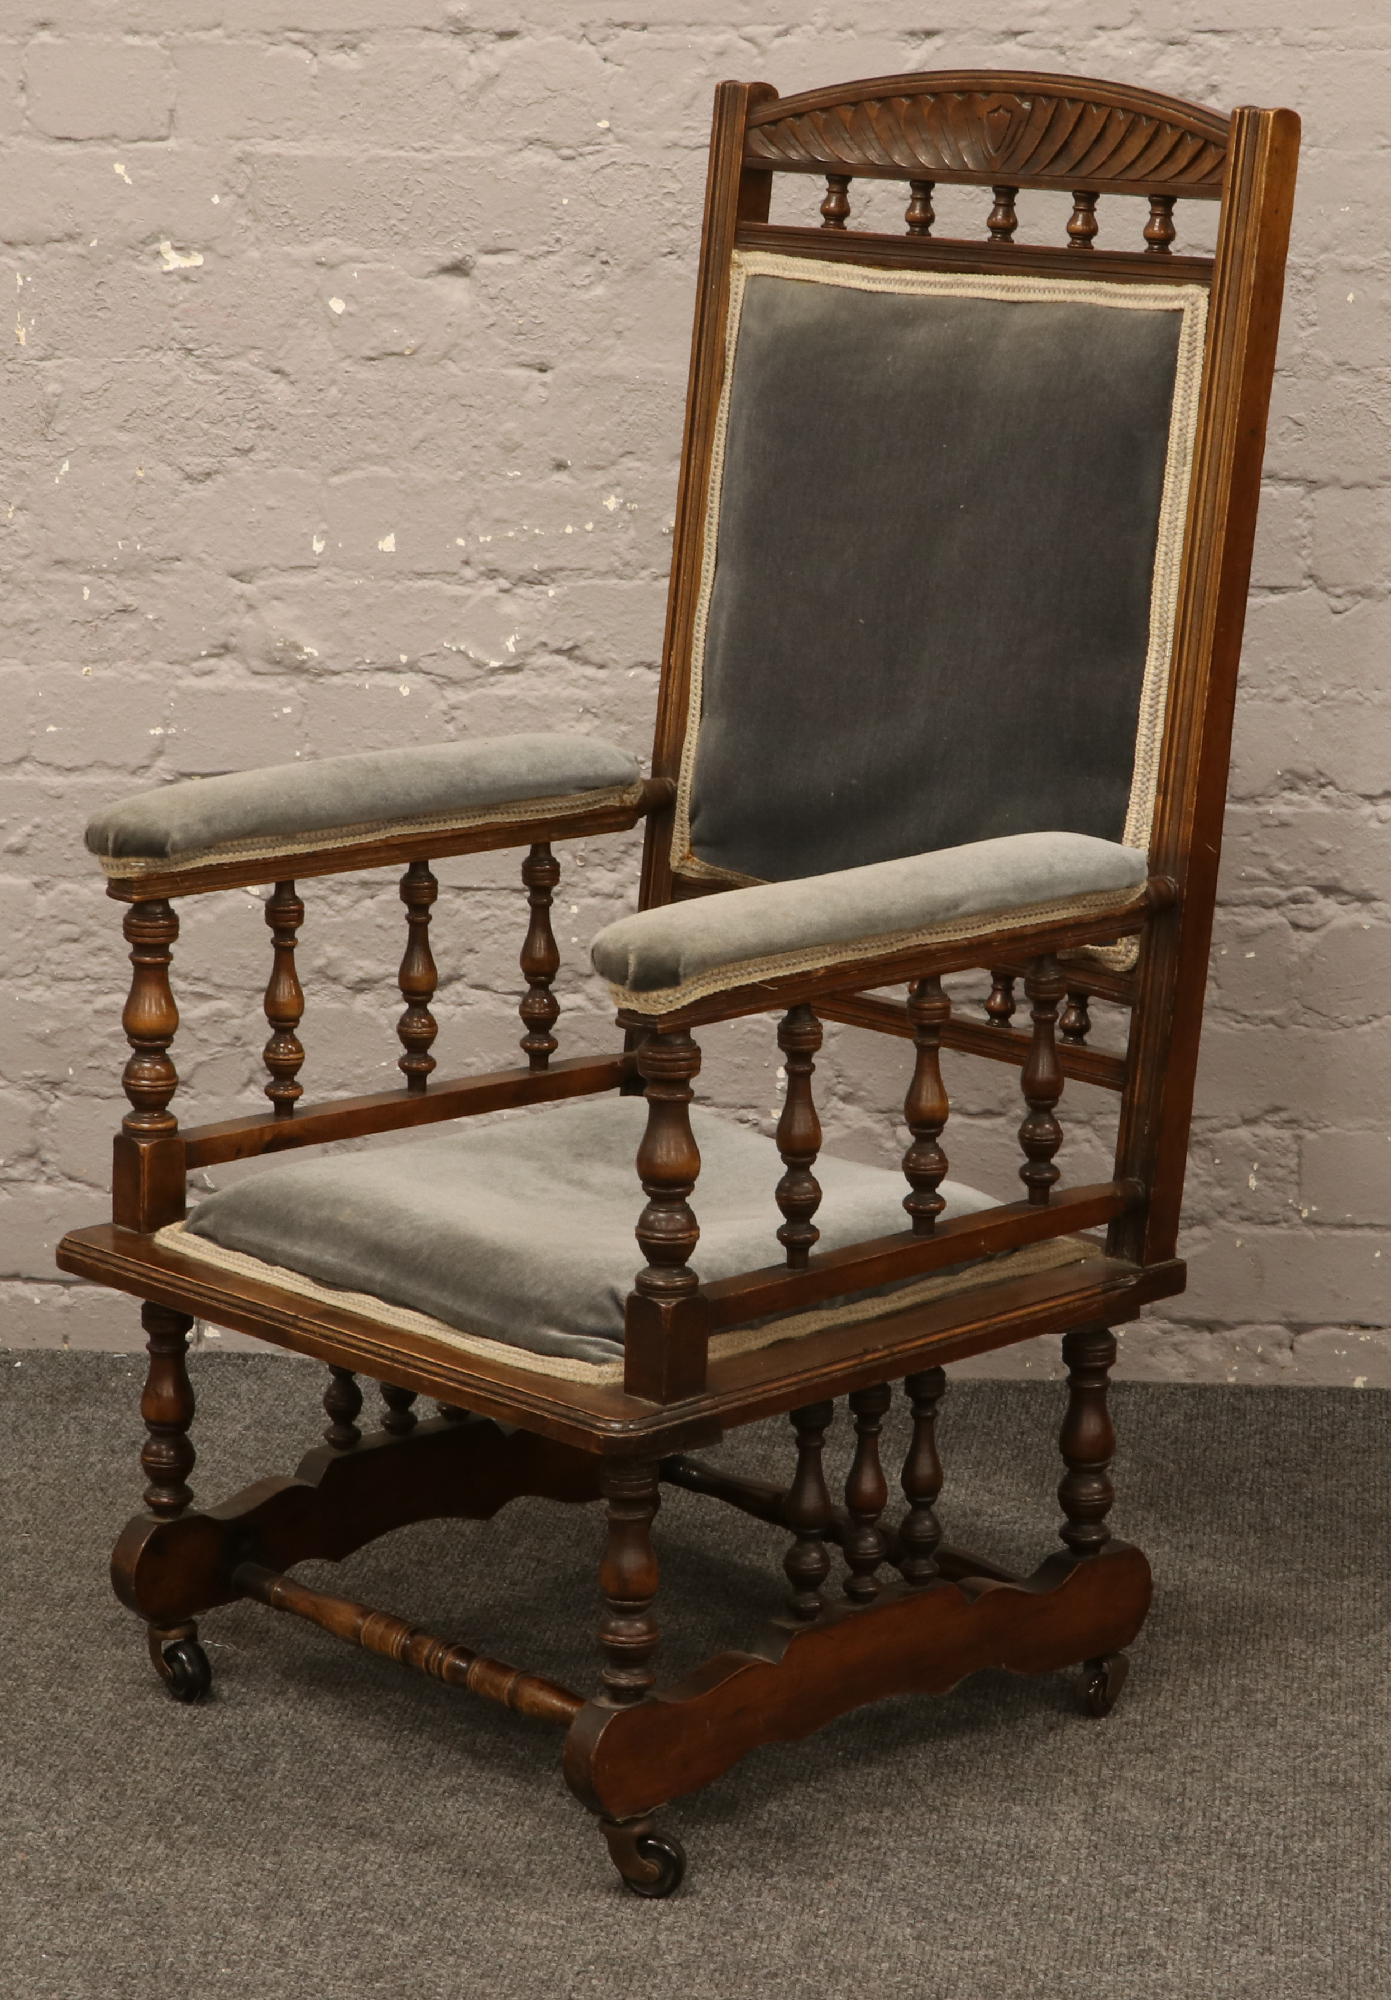 A turned and carved mahogany American rocking chair.